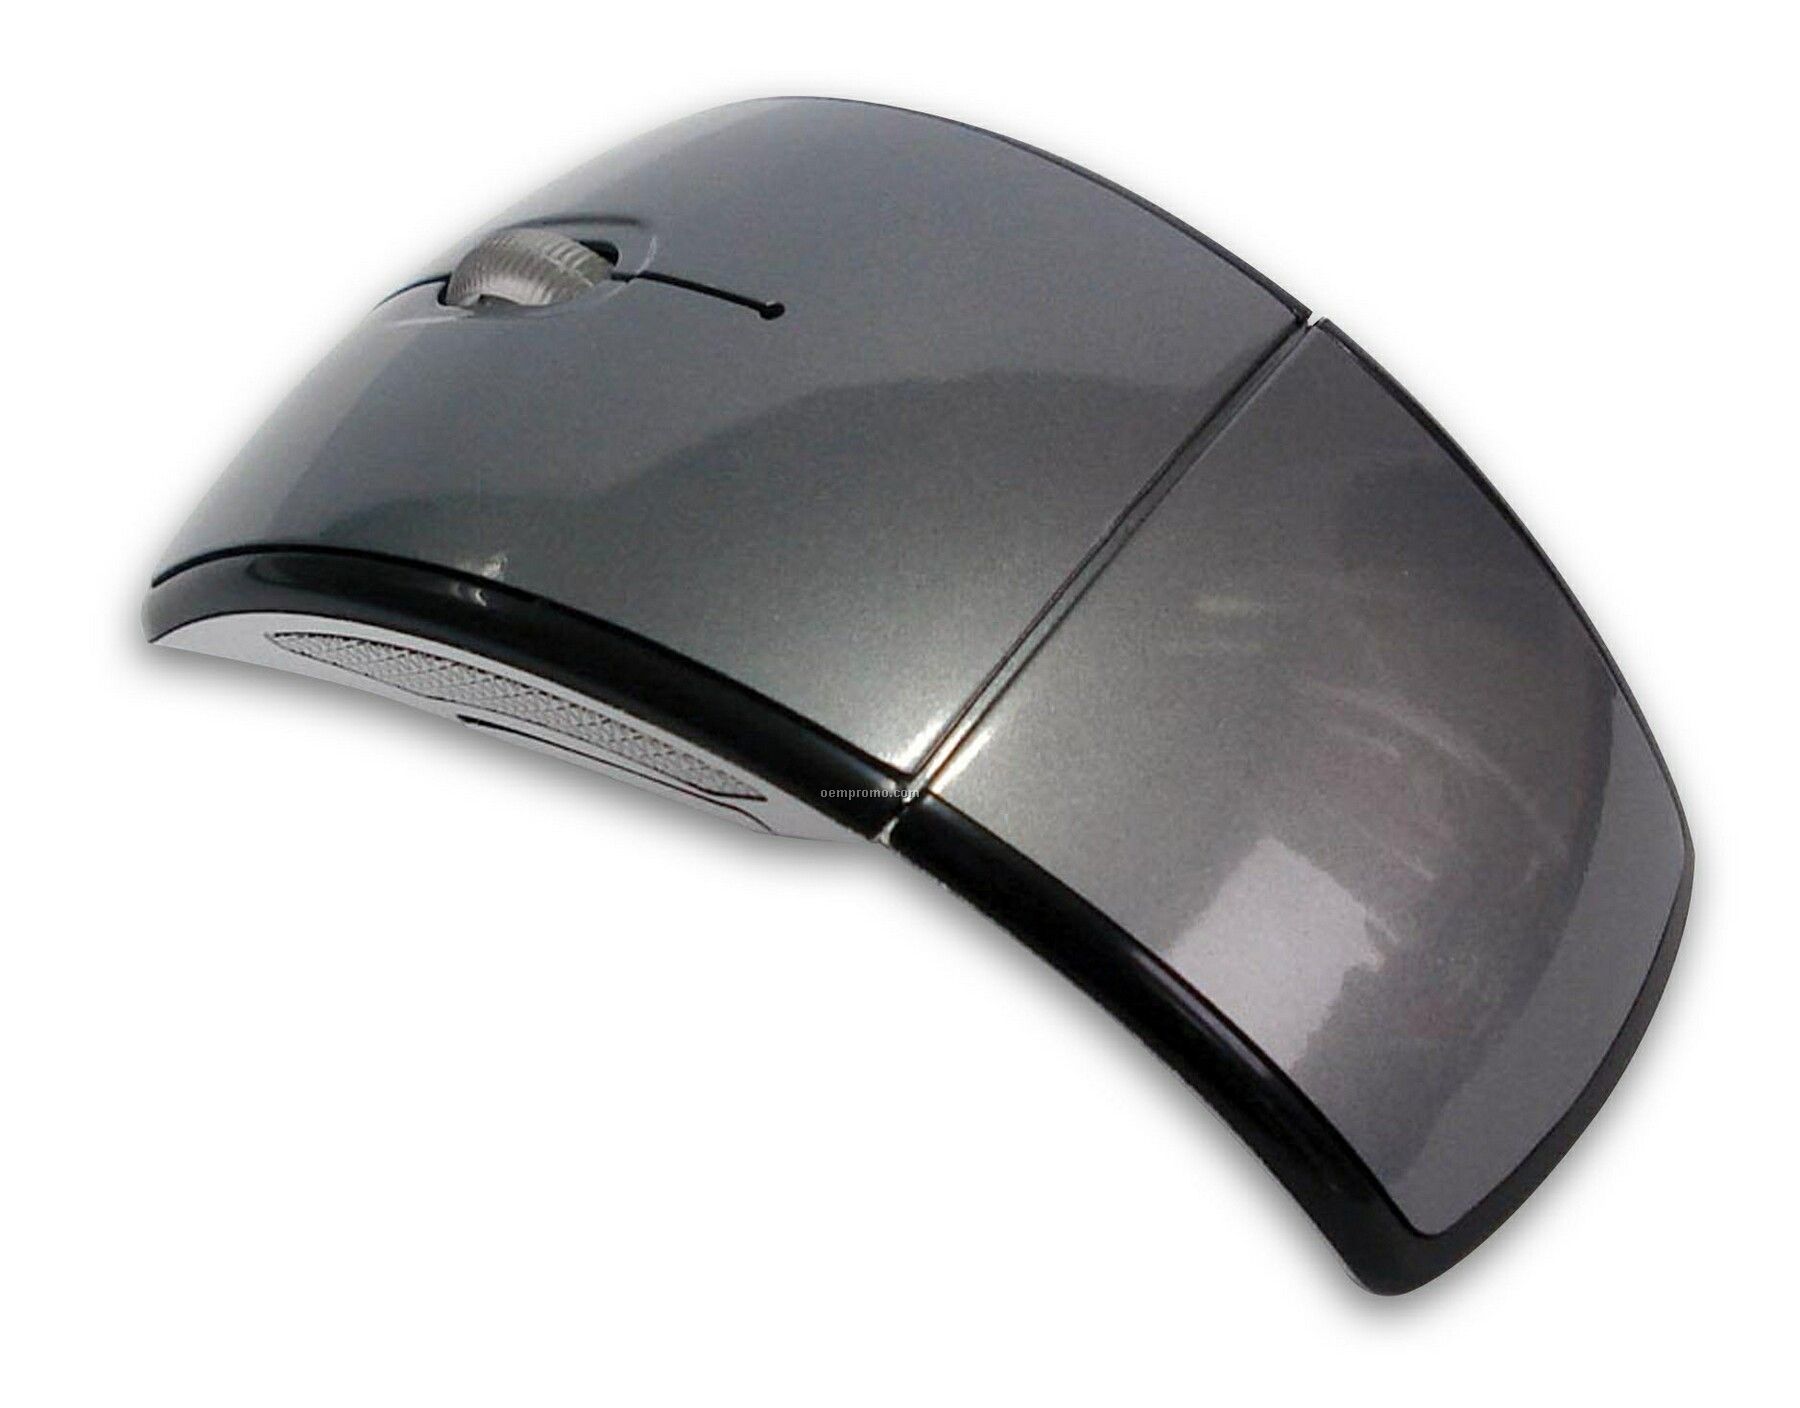 Wireless Optical Mouse W/ USB Receiver